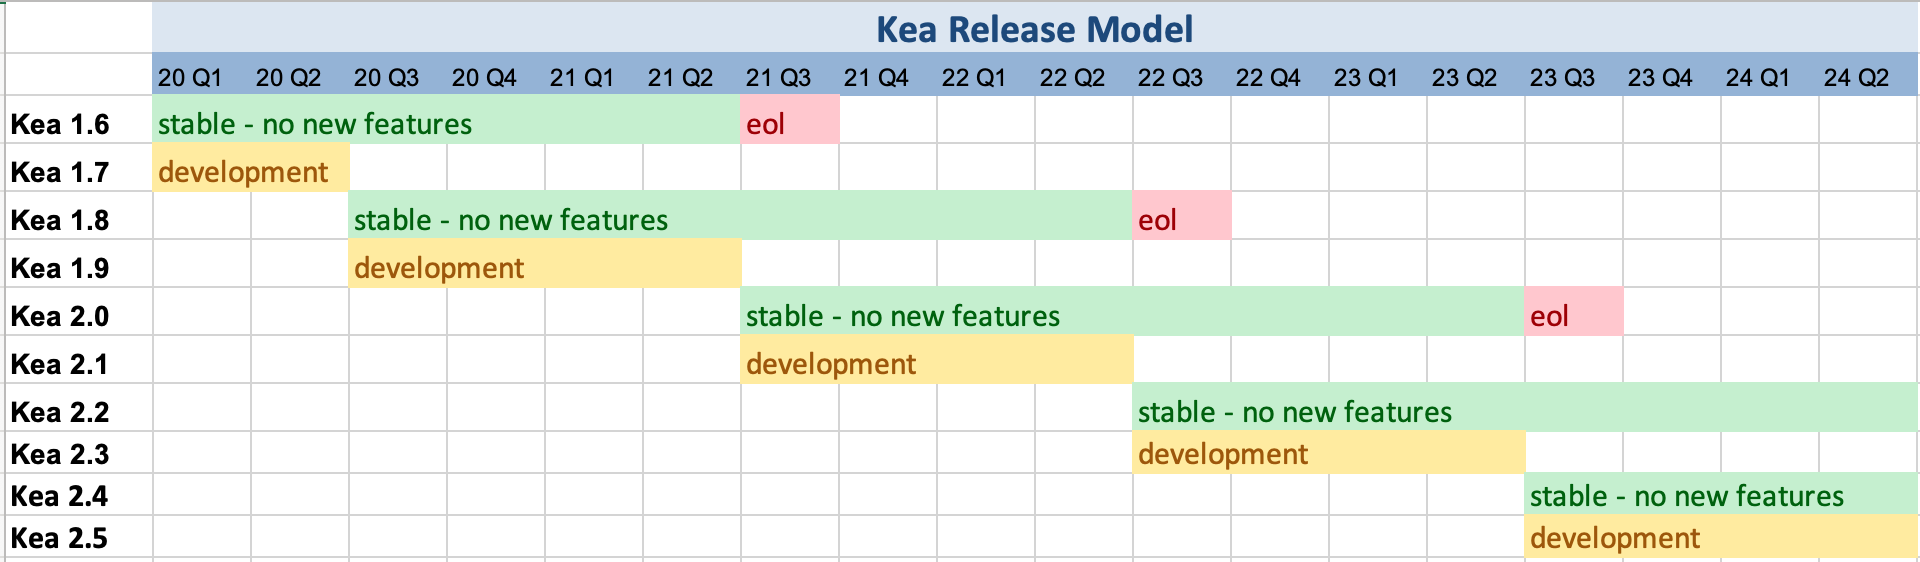 Table of Projected Kea Release Dates